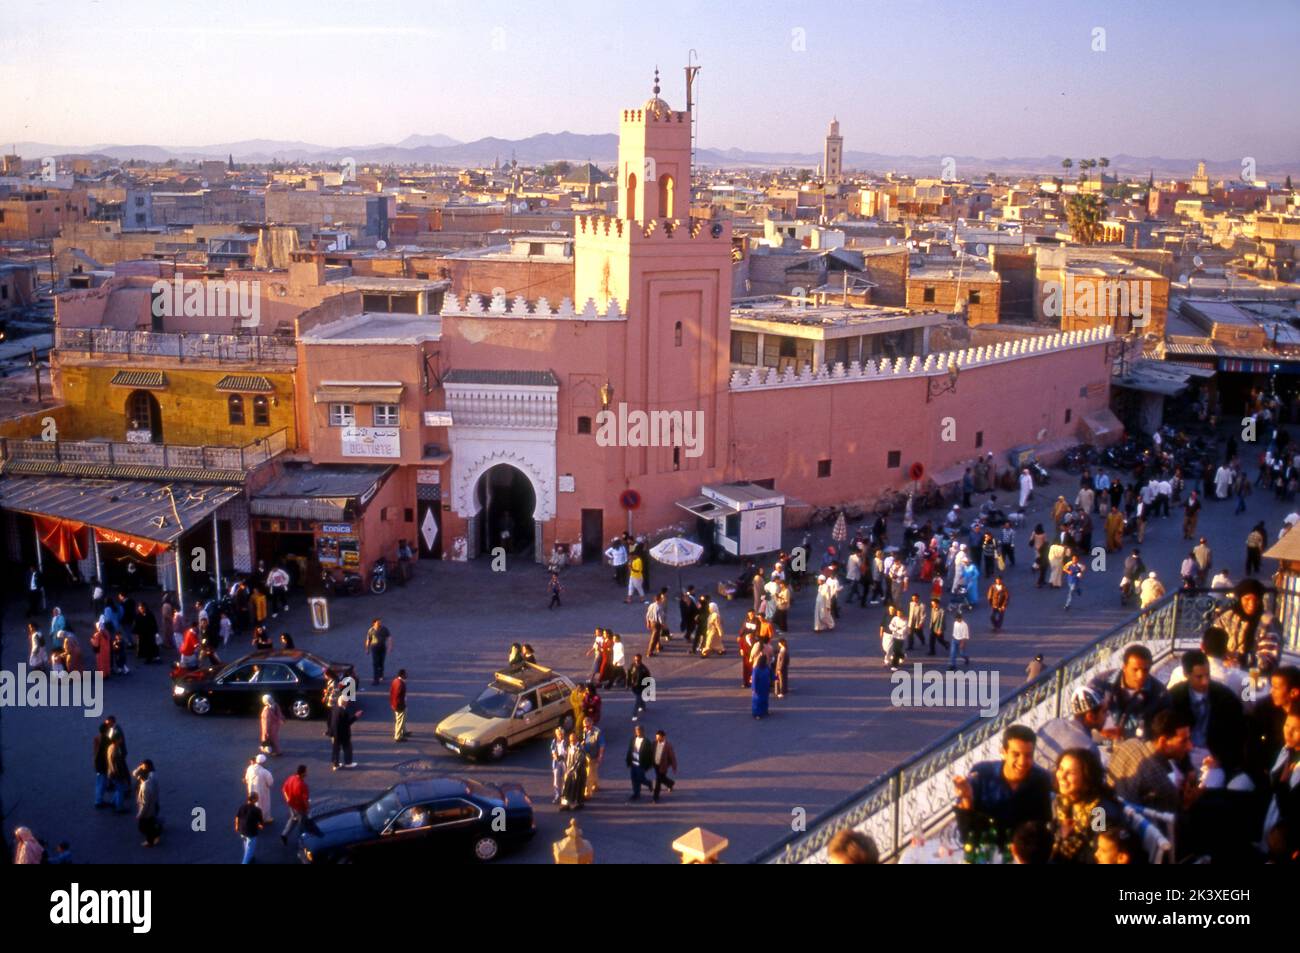 Jemma el-Fnaa is the main square and market-place in Marrakech, Morocco. Stock Photo